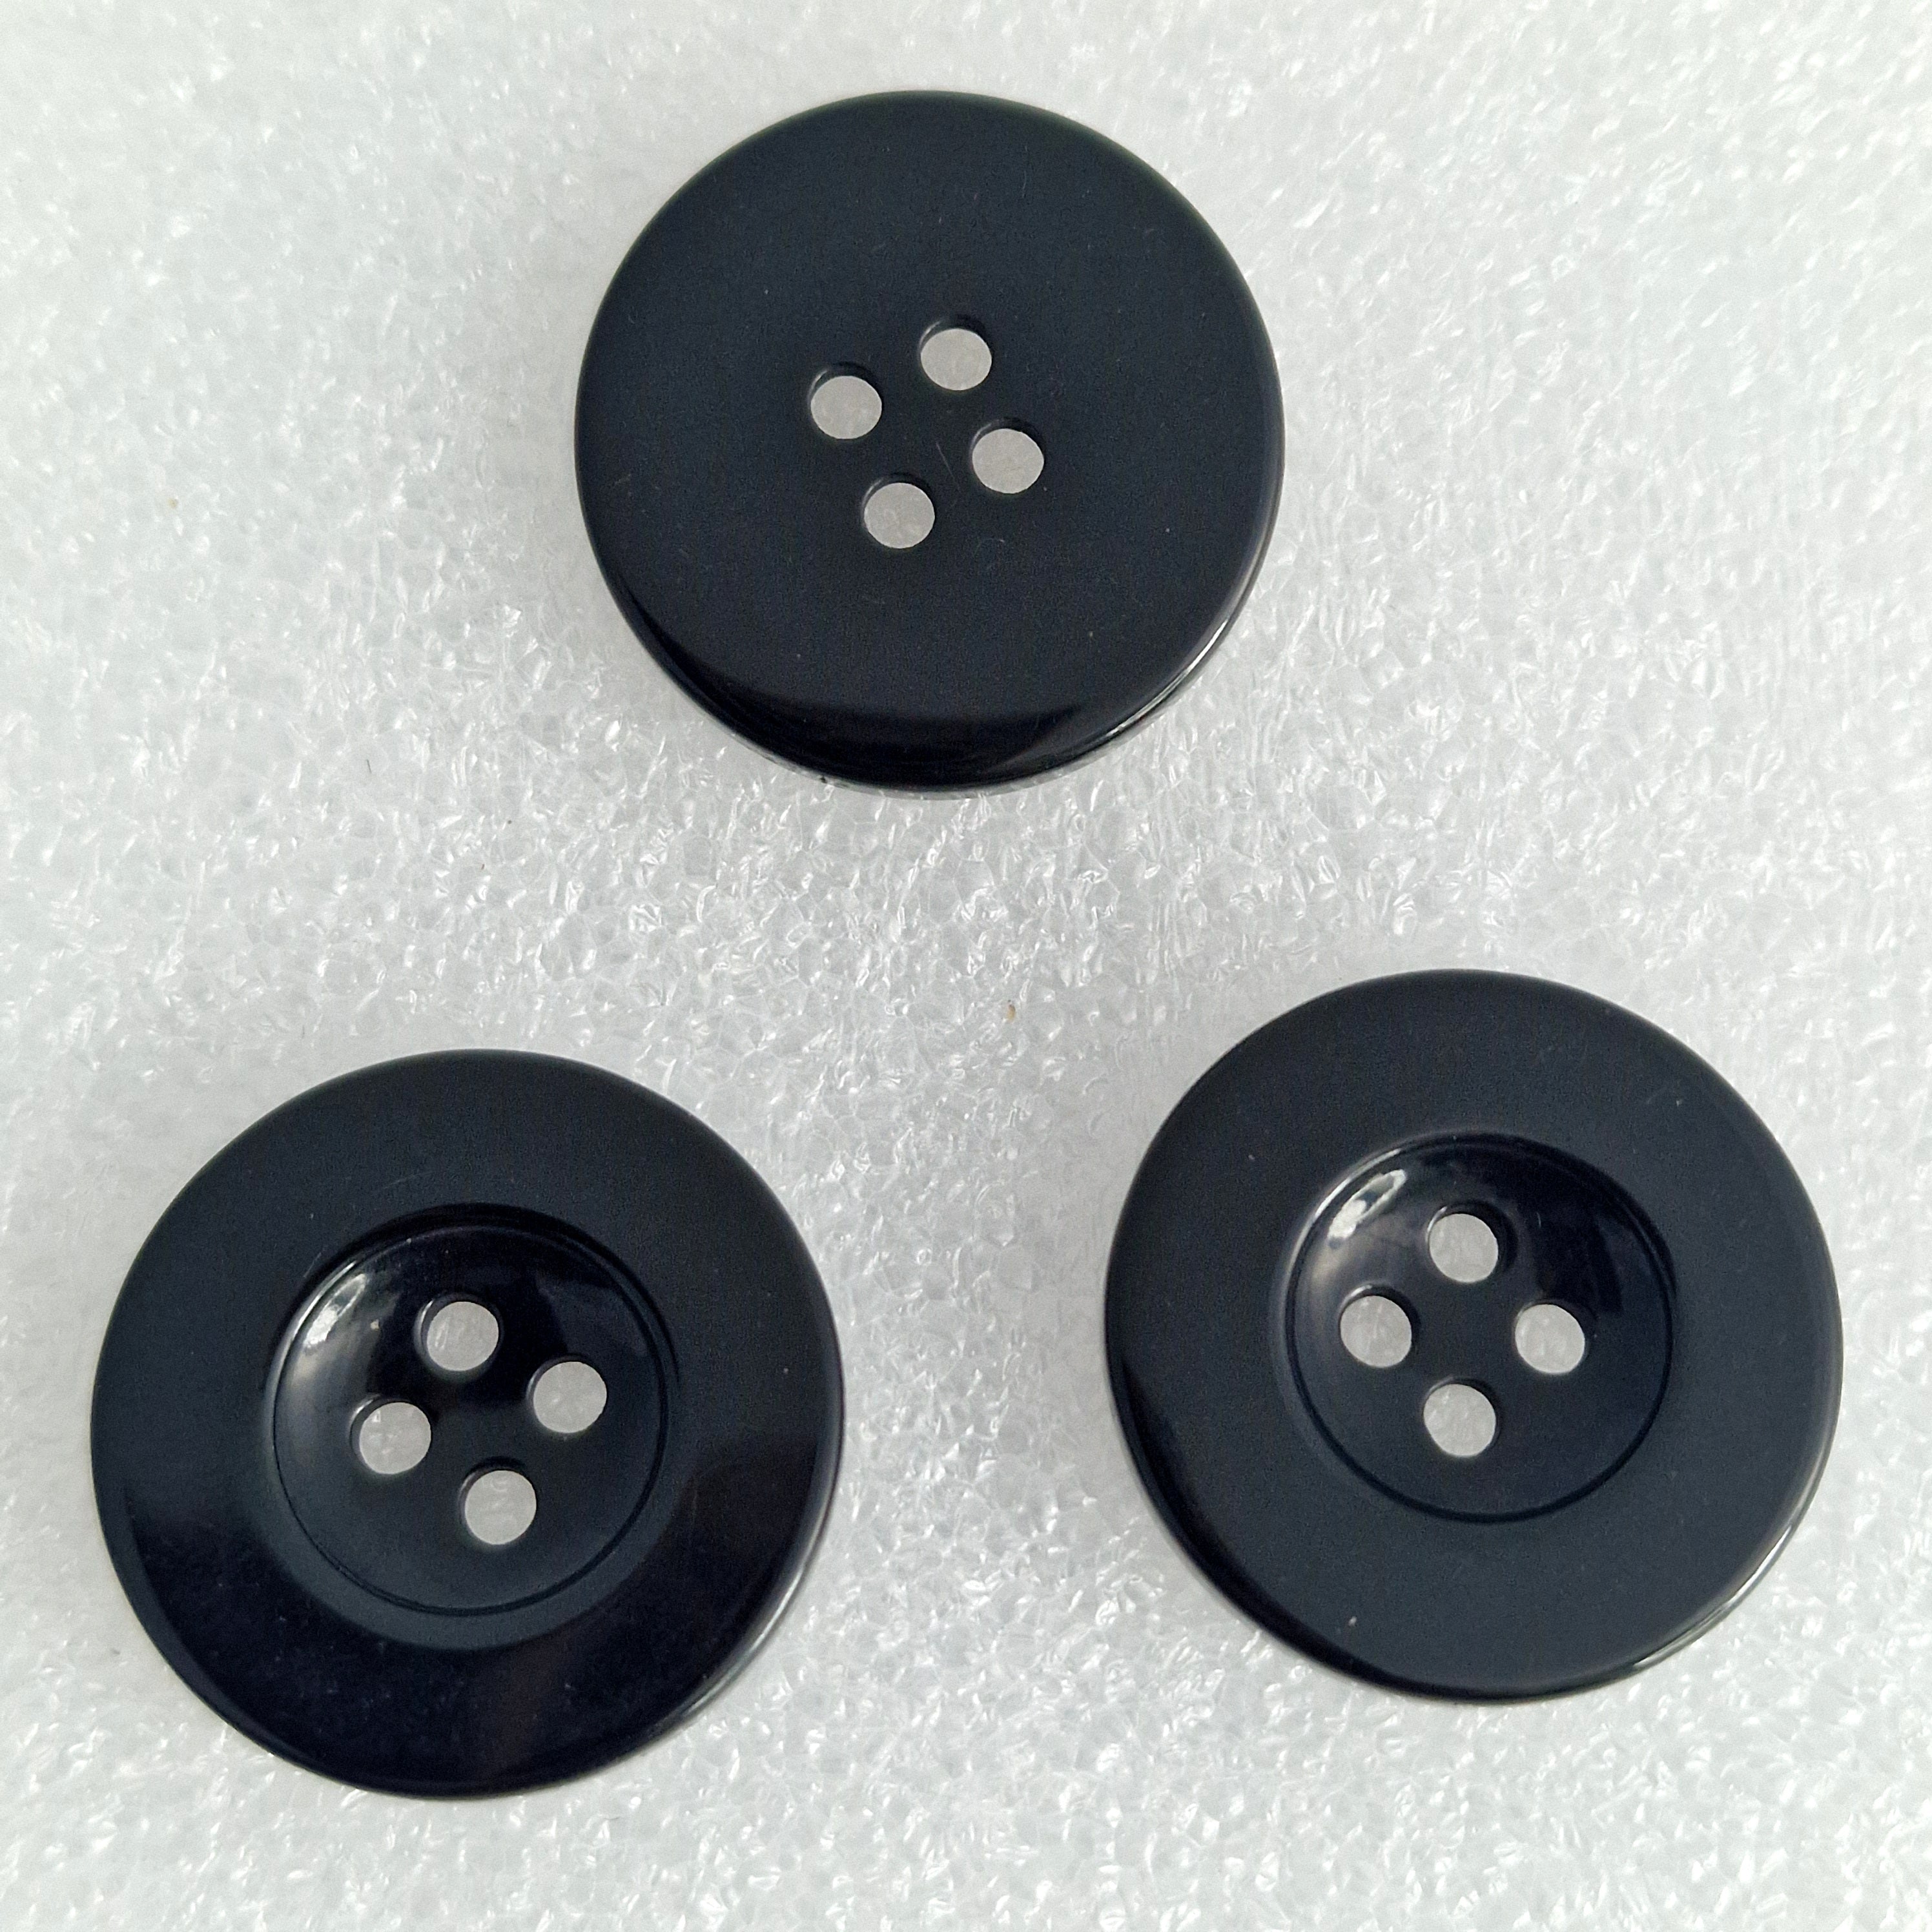 MajorCrafts 16pcs 25mm Black 4 Holes Round Resin Sewing Buttons